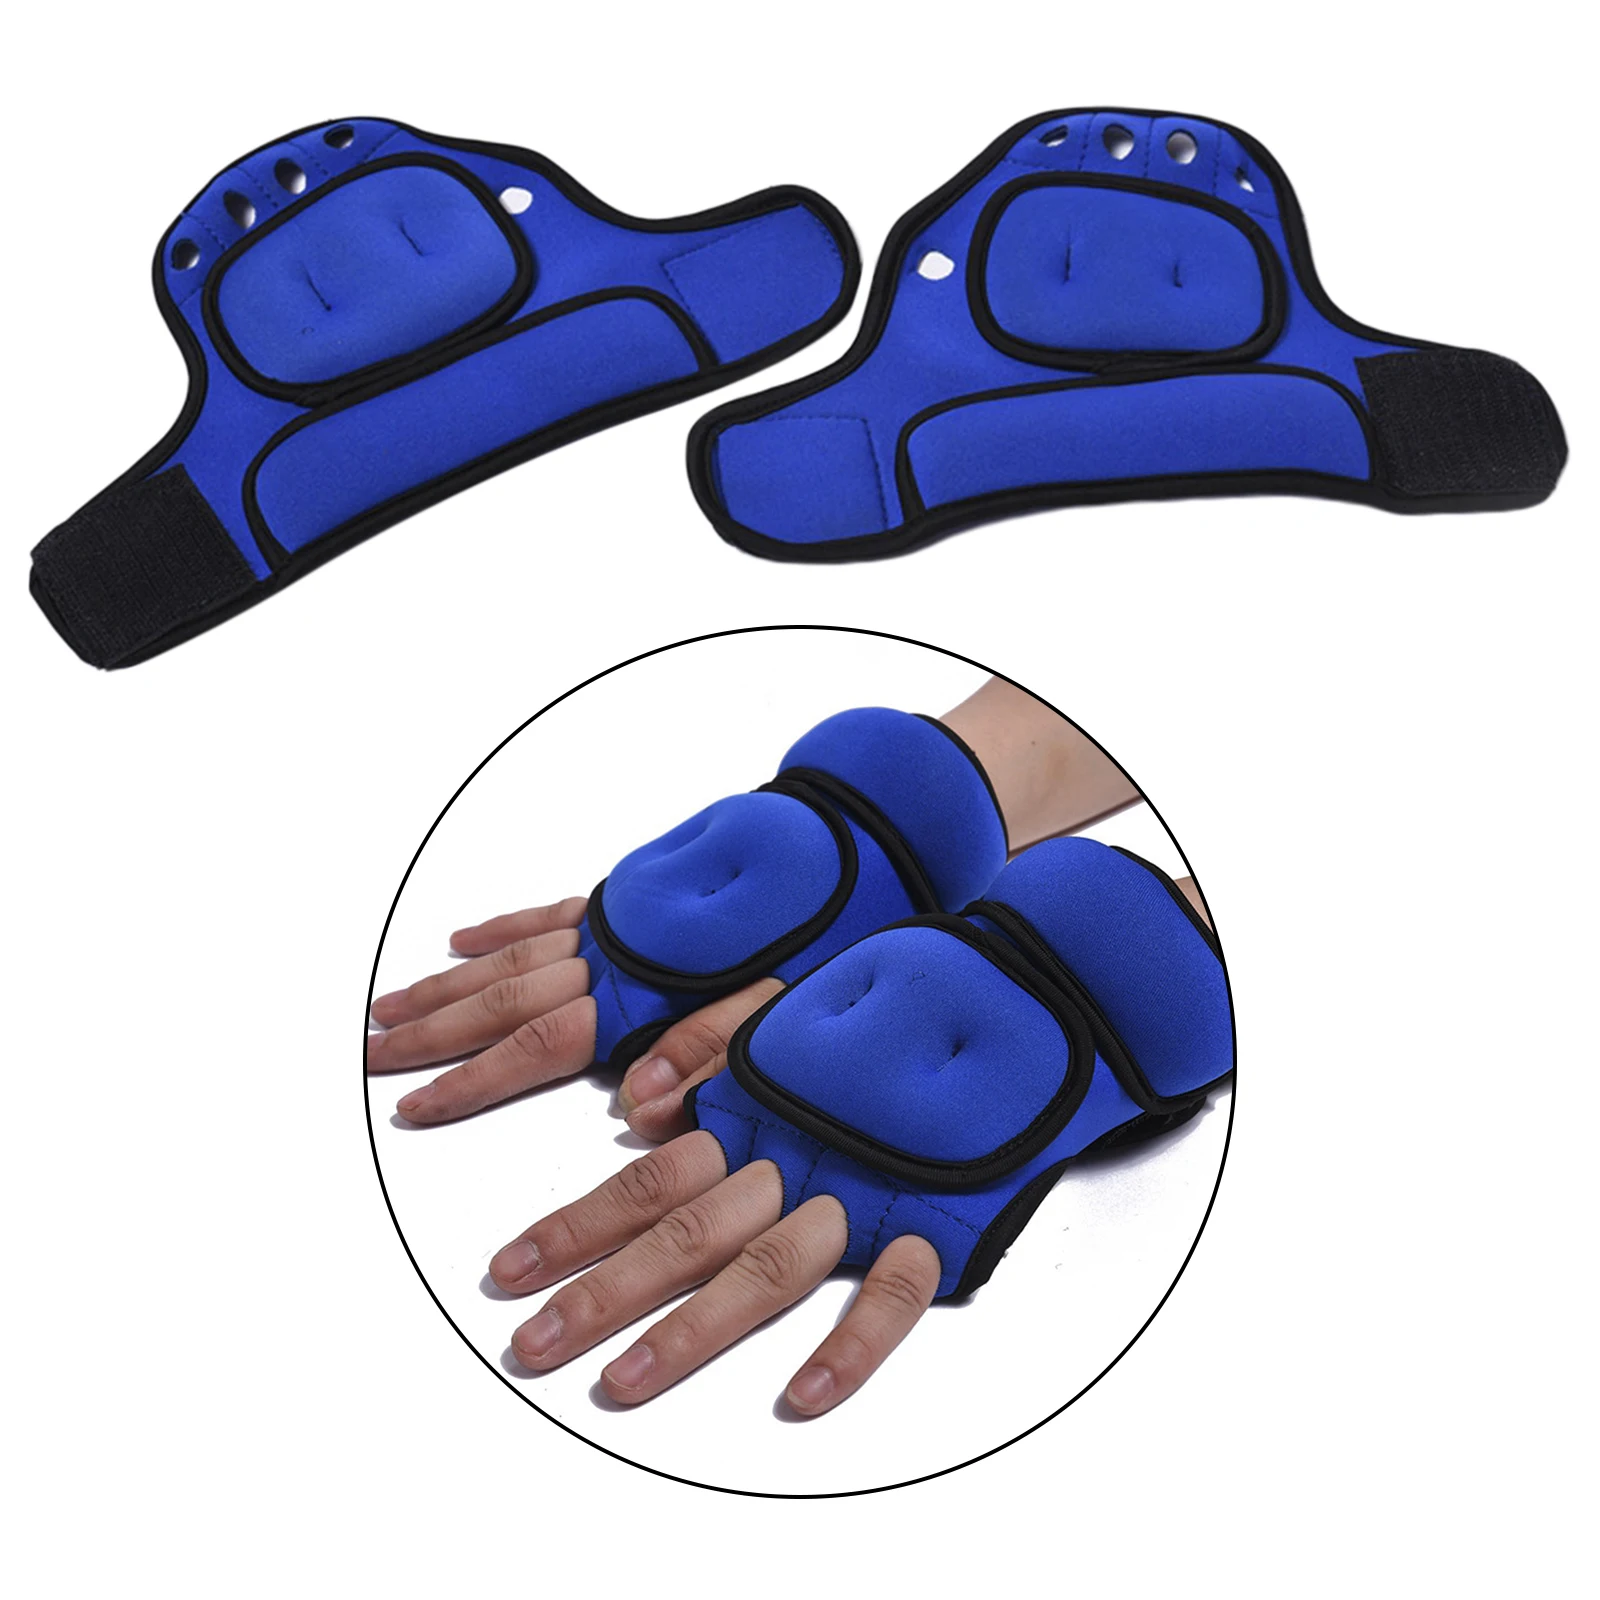 1 Pound Each Glove for Sculpting MMA Cardio Aerobics Hand Speed Coordination Shoulder Strength and Kickboxing Nayoya Weighted Gloves 